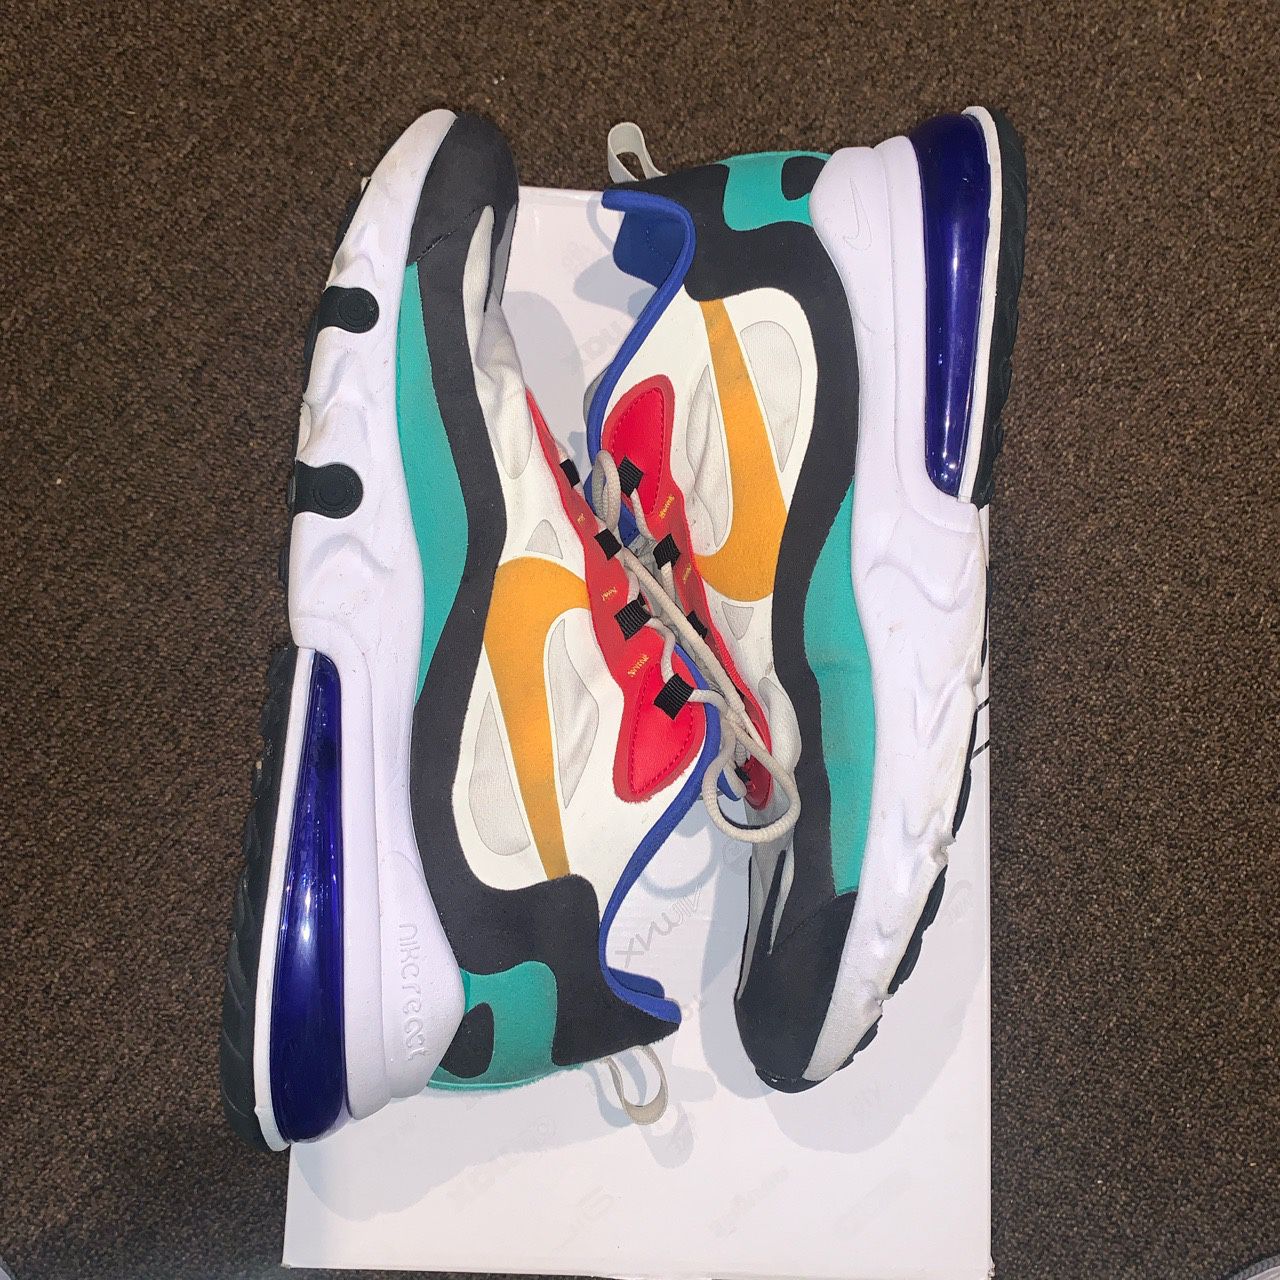 Size 9.5 2017 Nike react 270 Louis Vuitton print with size 36-42 belt for  Sale in Tacoma, WA - OfferUp